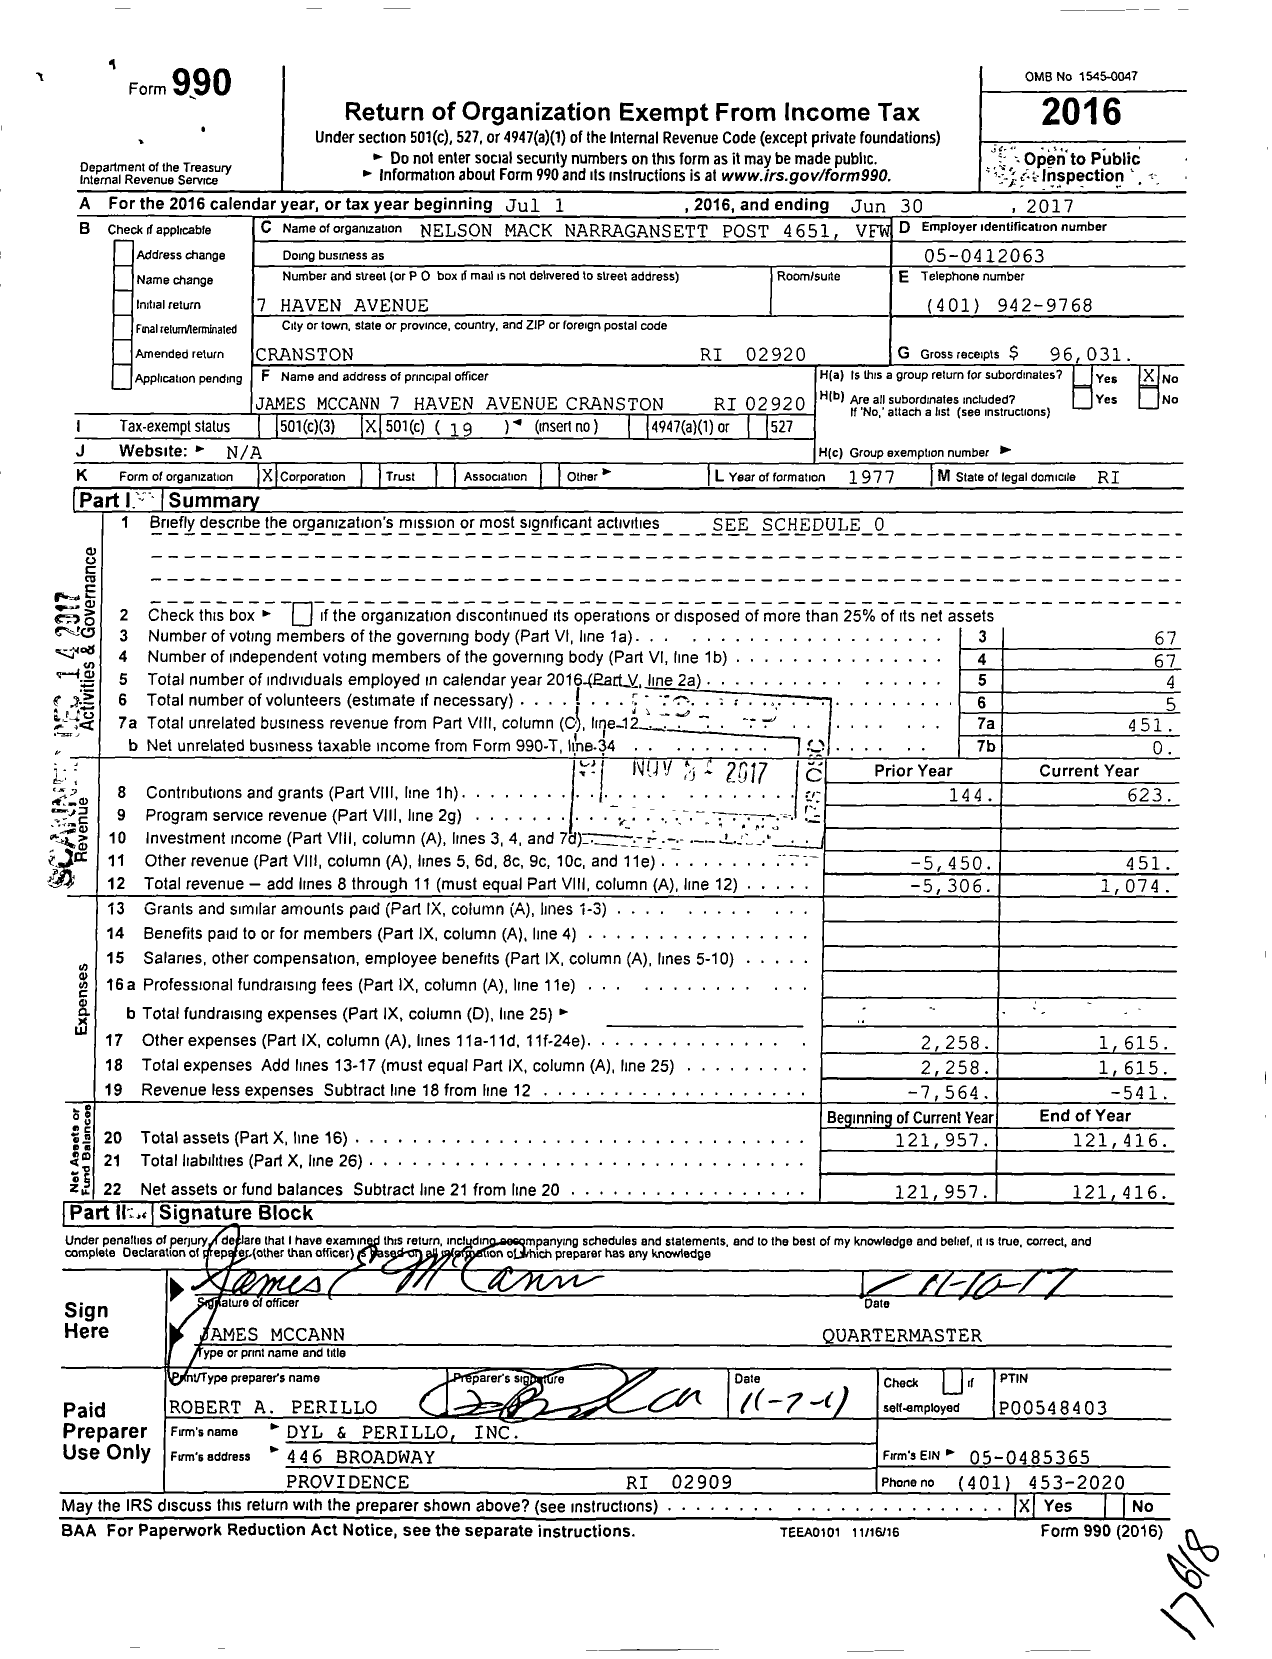 Image of first page of 2016 Form 990O for Veterans of Foreign Wars Dept of Rhode Island - 4651 Mack Narragansett Post